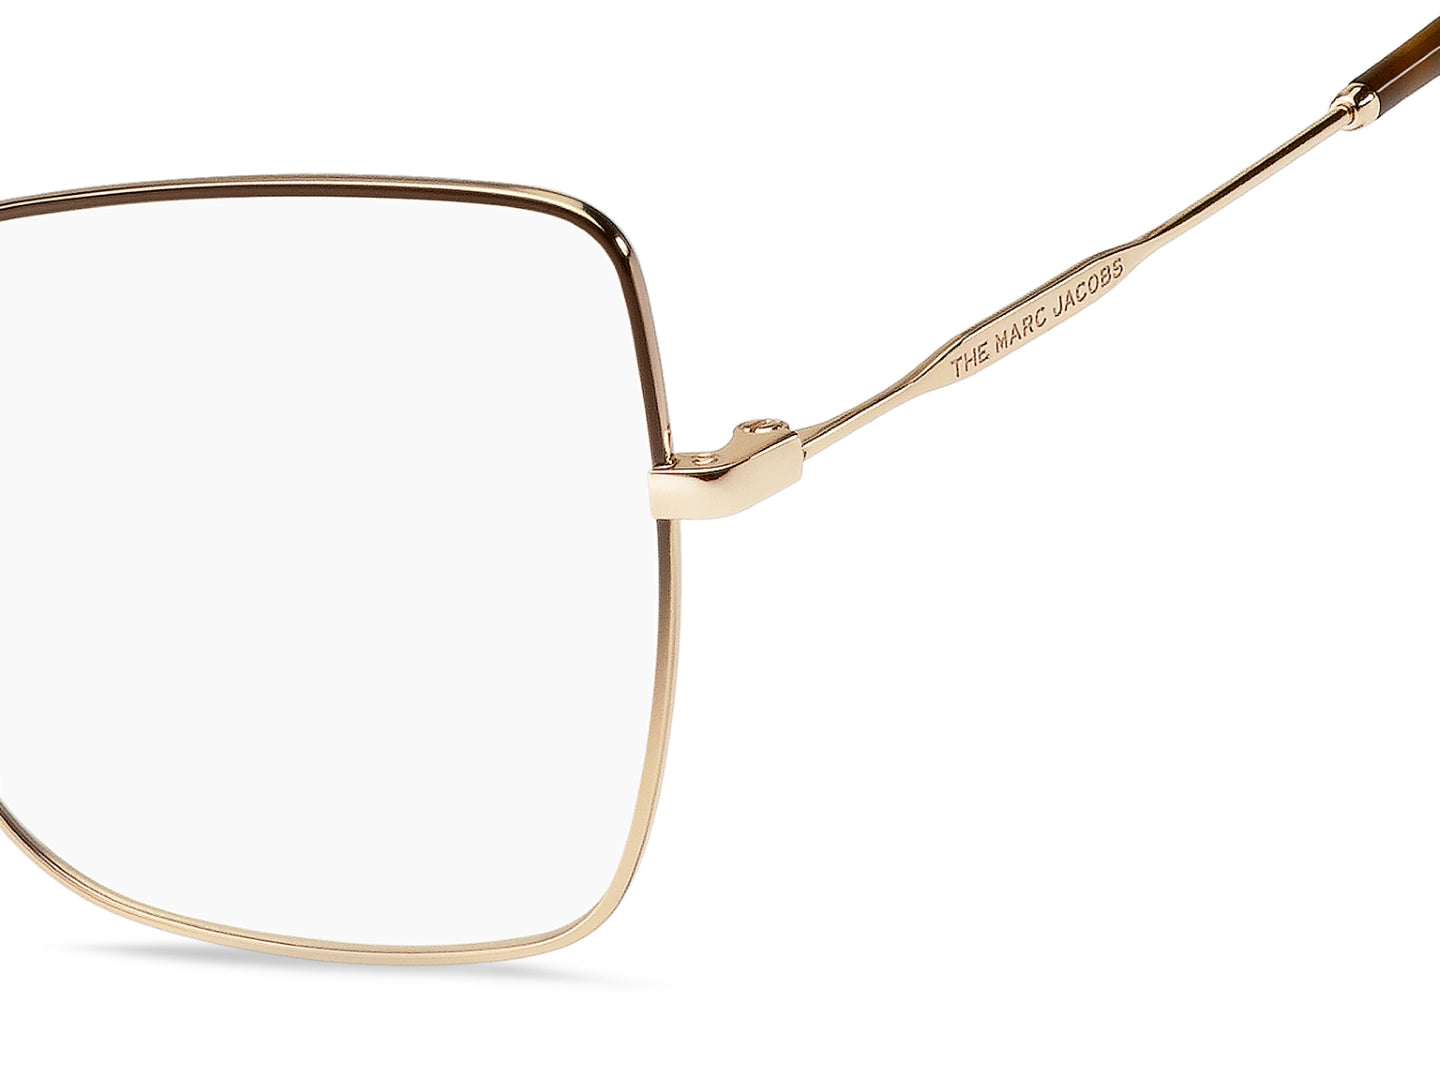 Marc Jacobs Woman Butterfly Eyeglasses